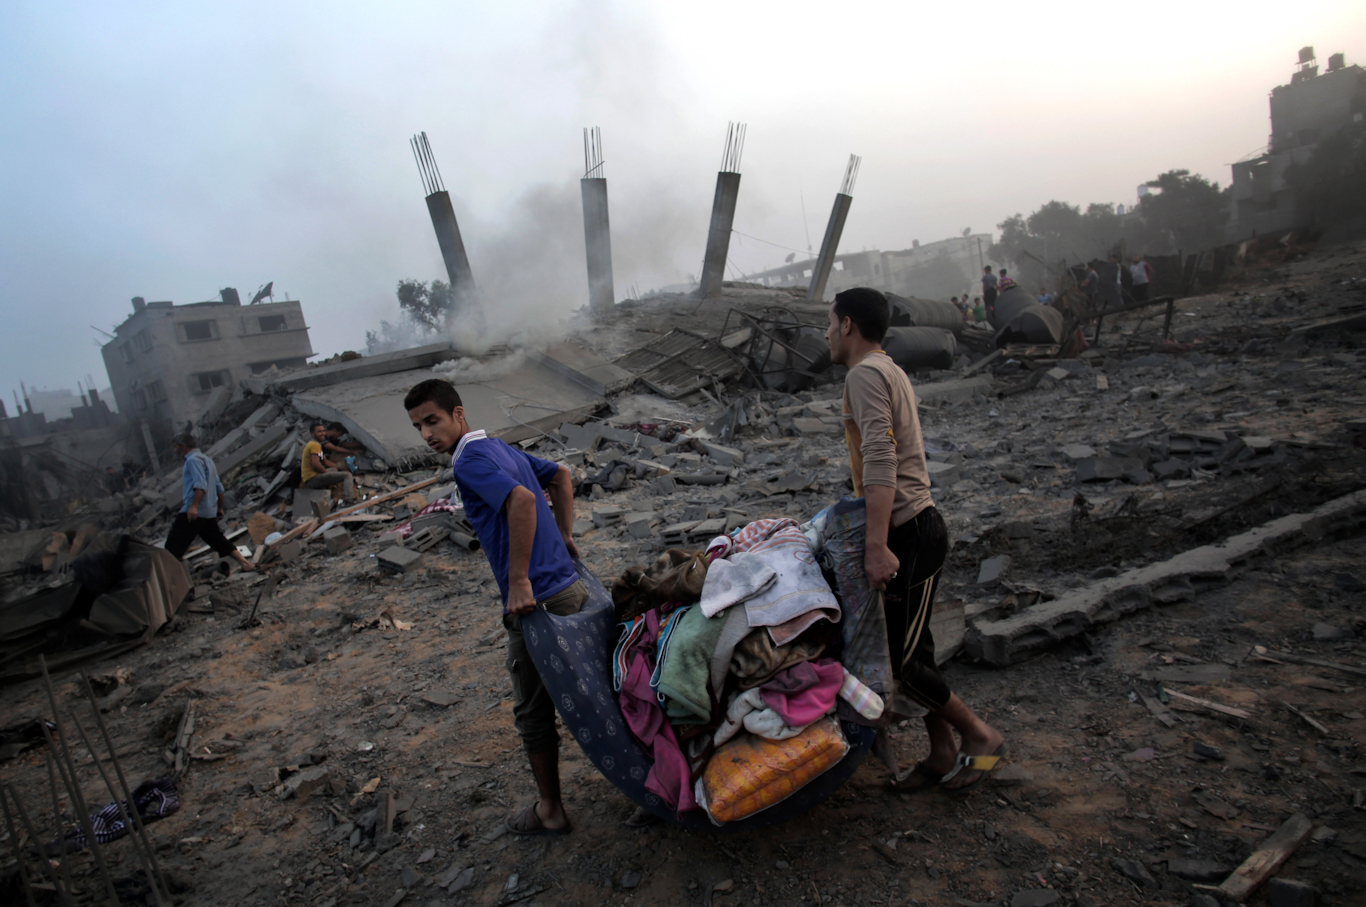 Palestinians salvage what they can from the rubble of a home destroyed by an overnight Israeli airstrike in Gaza, July 8, 2014. Khalil Hamra | AP